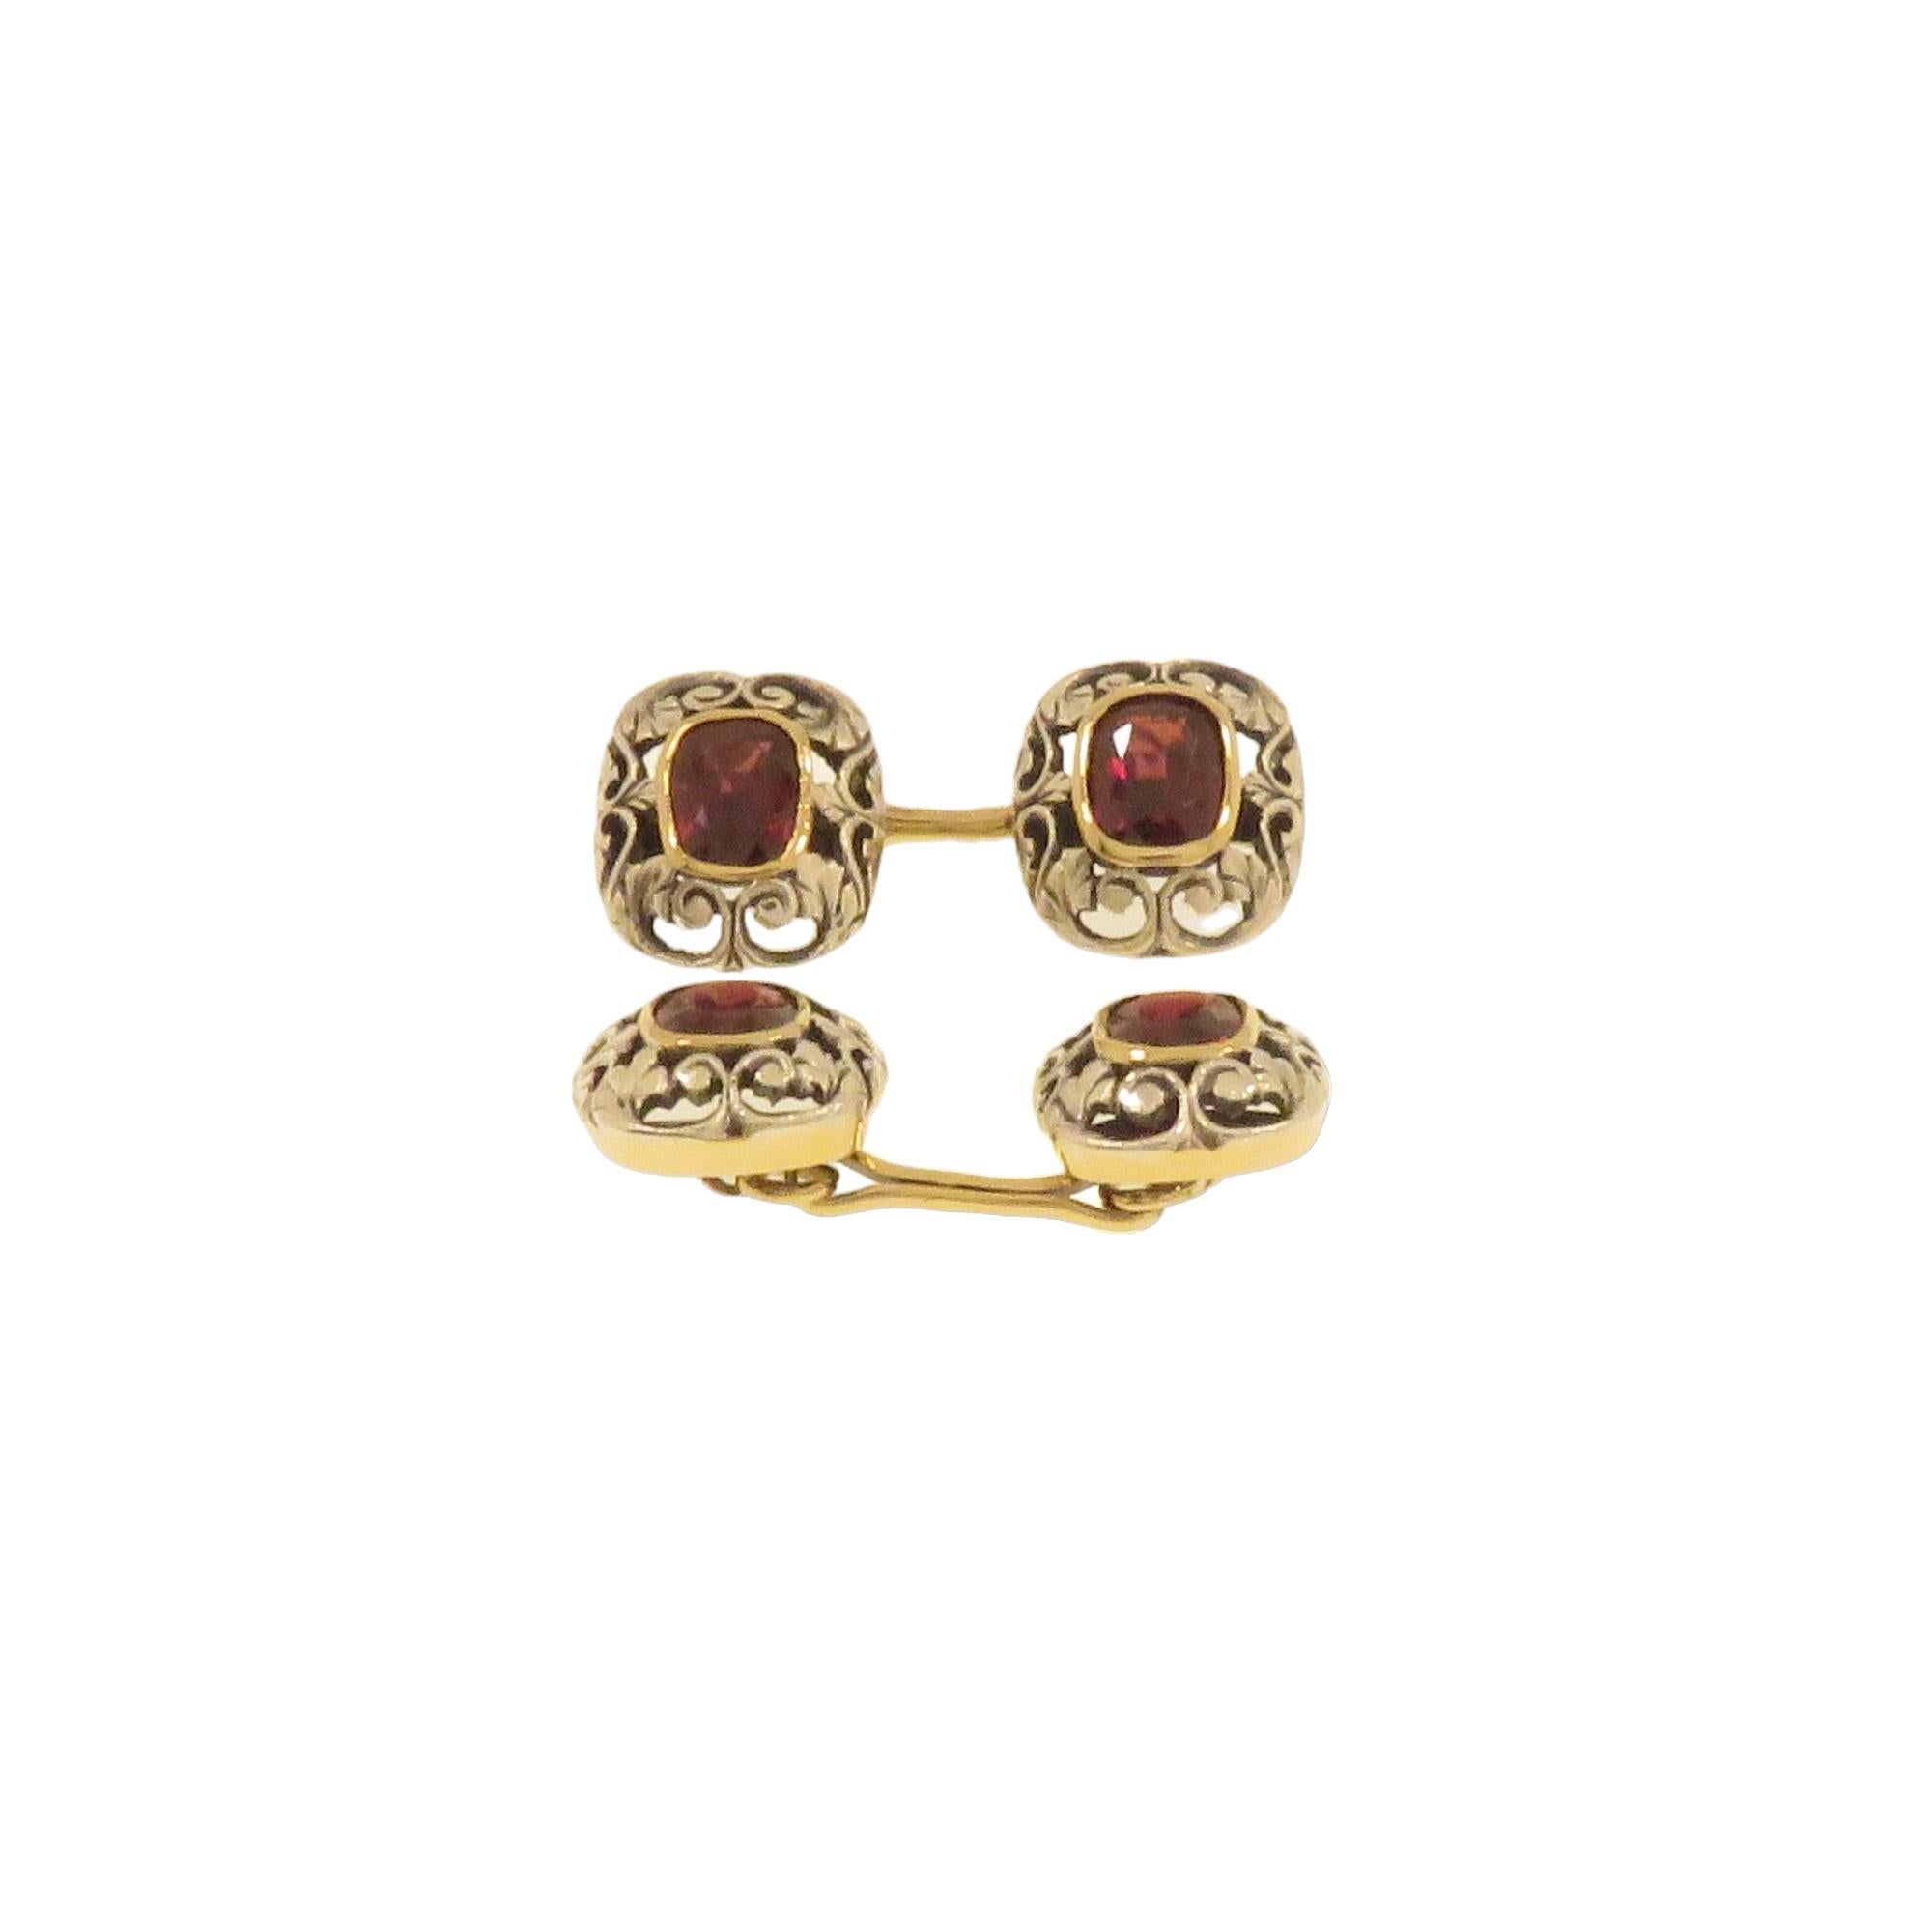 Retro Antique Cufflinks with Garnets in Gold And Silver 1920s For Sale